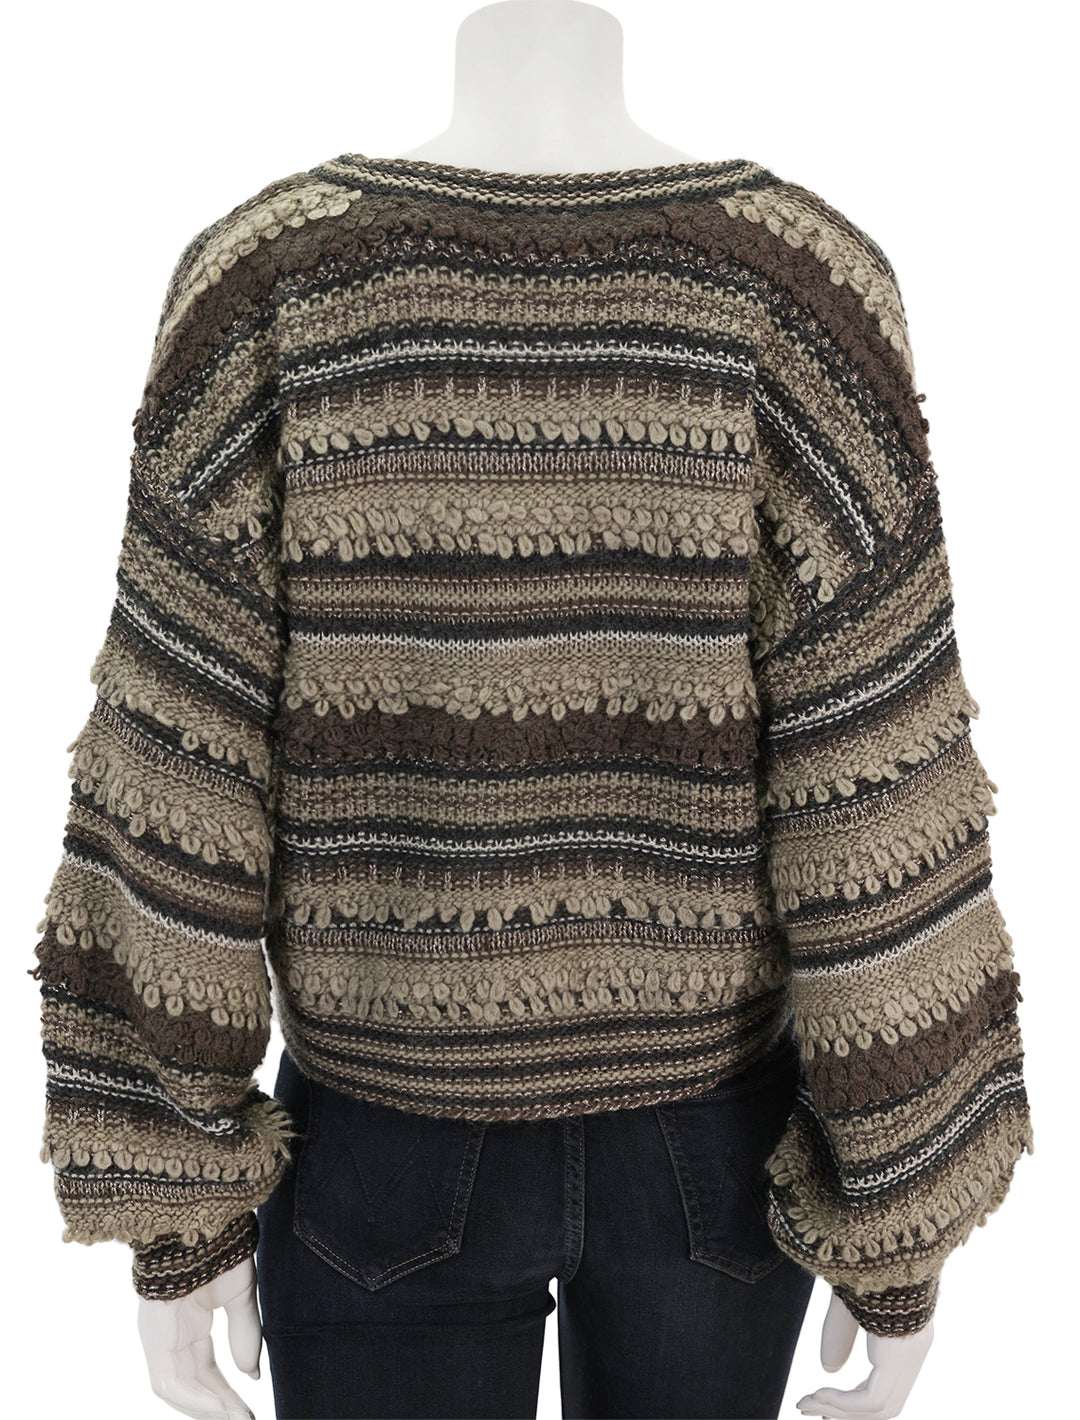 Back view of L'agence's harriet blouson sleeve cardigan.